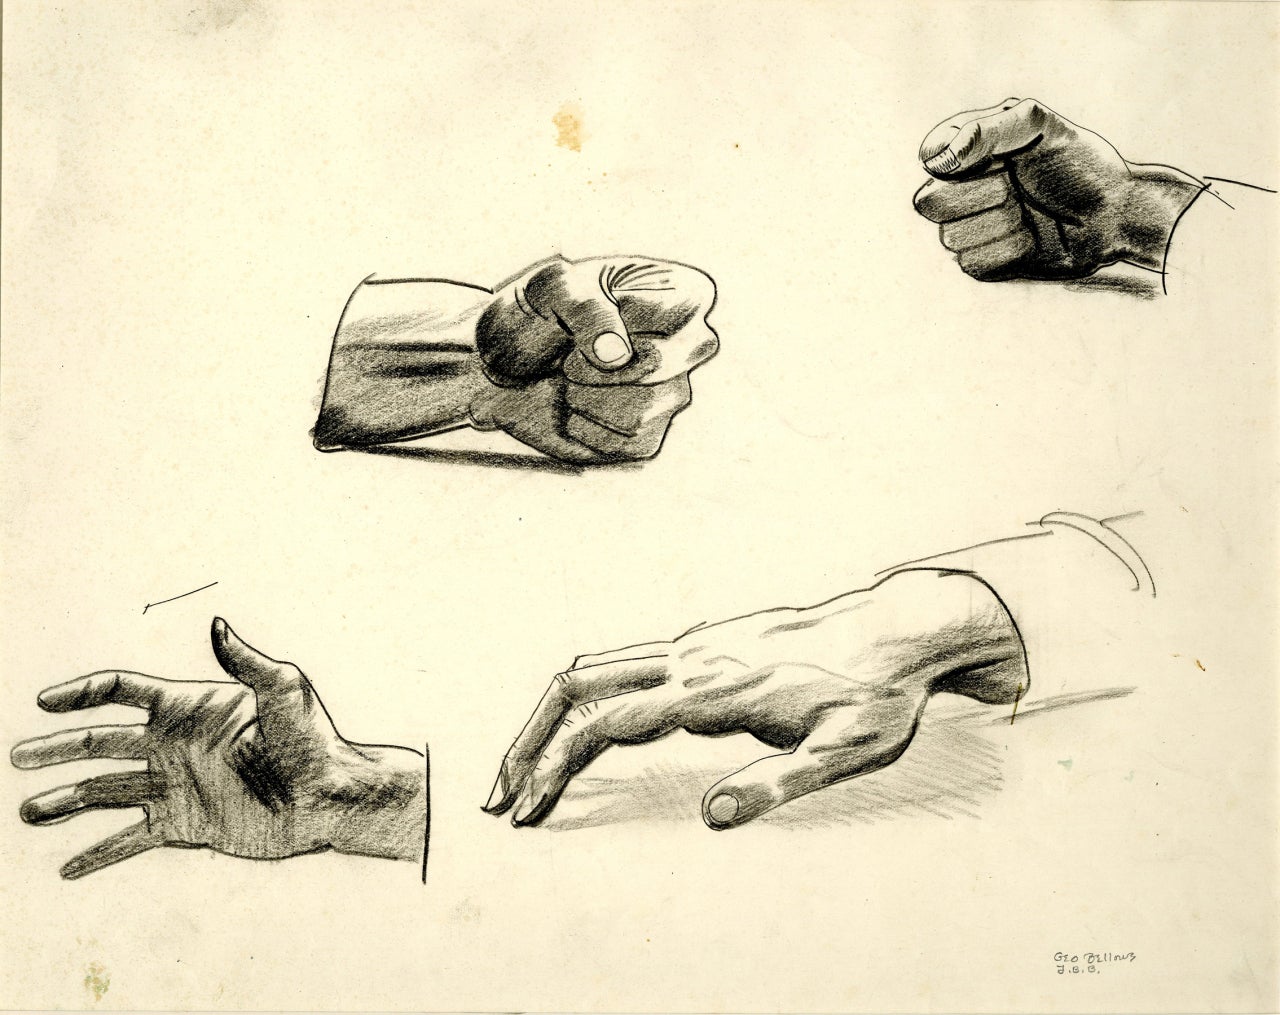 Signed lower right "Geo. Bellows J.B.B."

A study of 4 hands, presumably the artists.